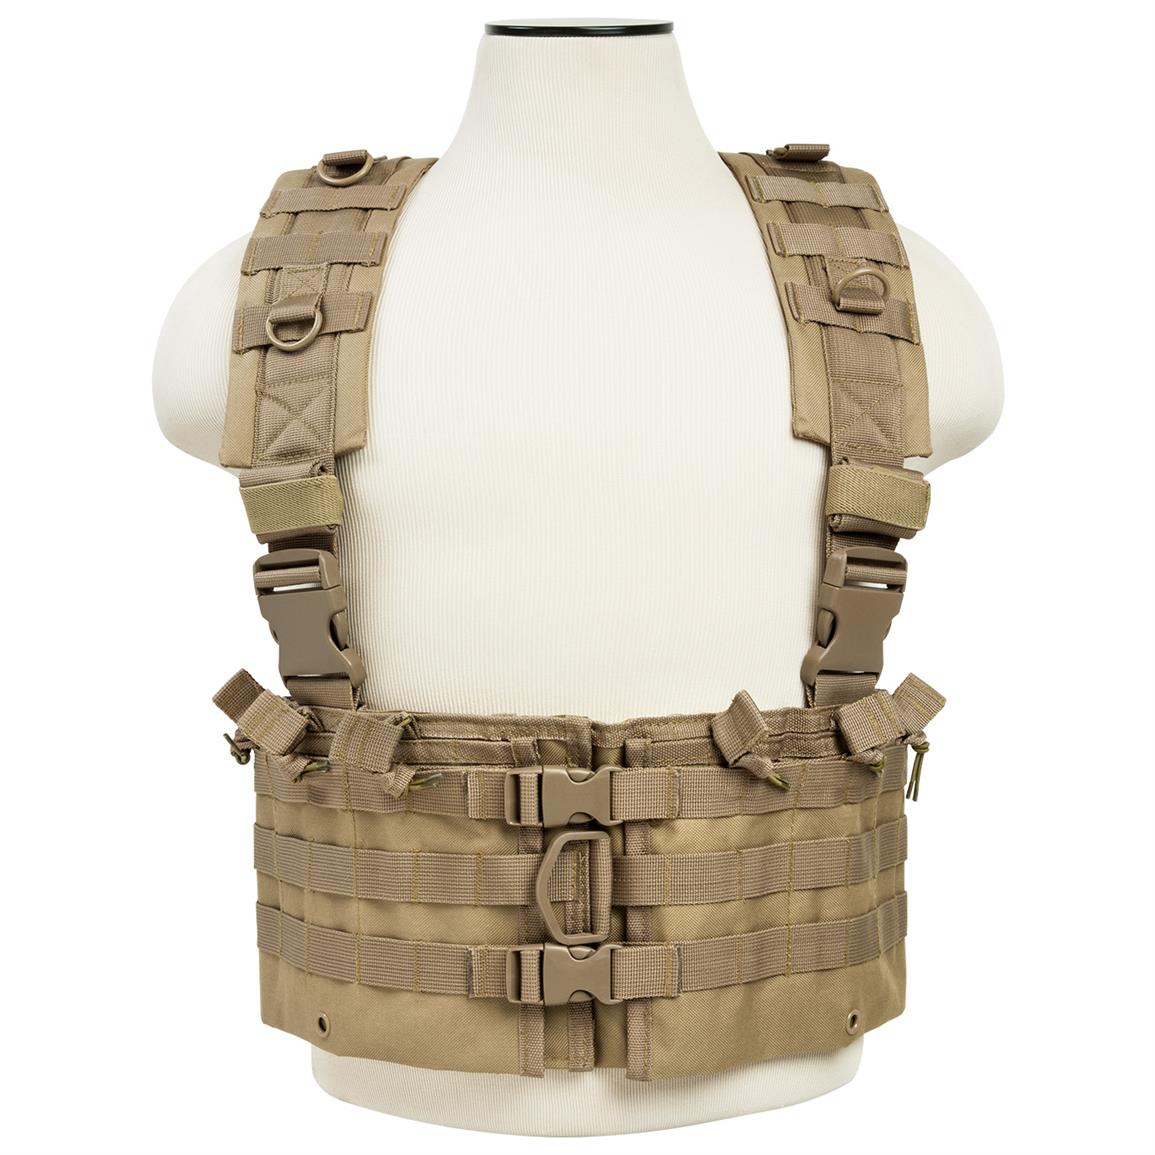 VISM by NcSTAR AR Chest Rig - 613596, Tactical Clothing at Sportsman's ...